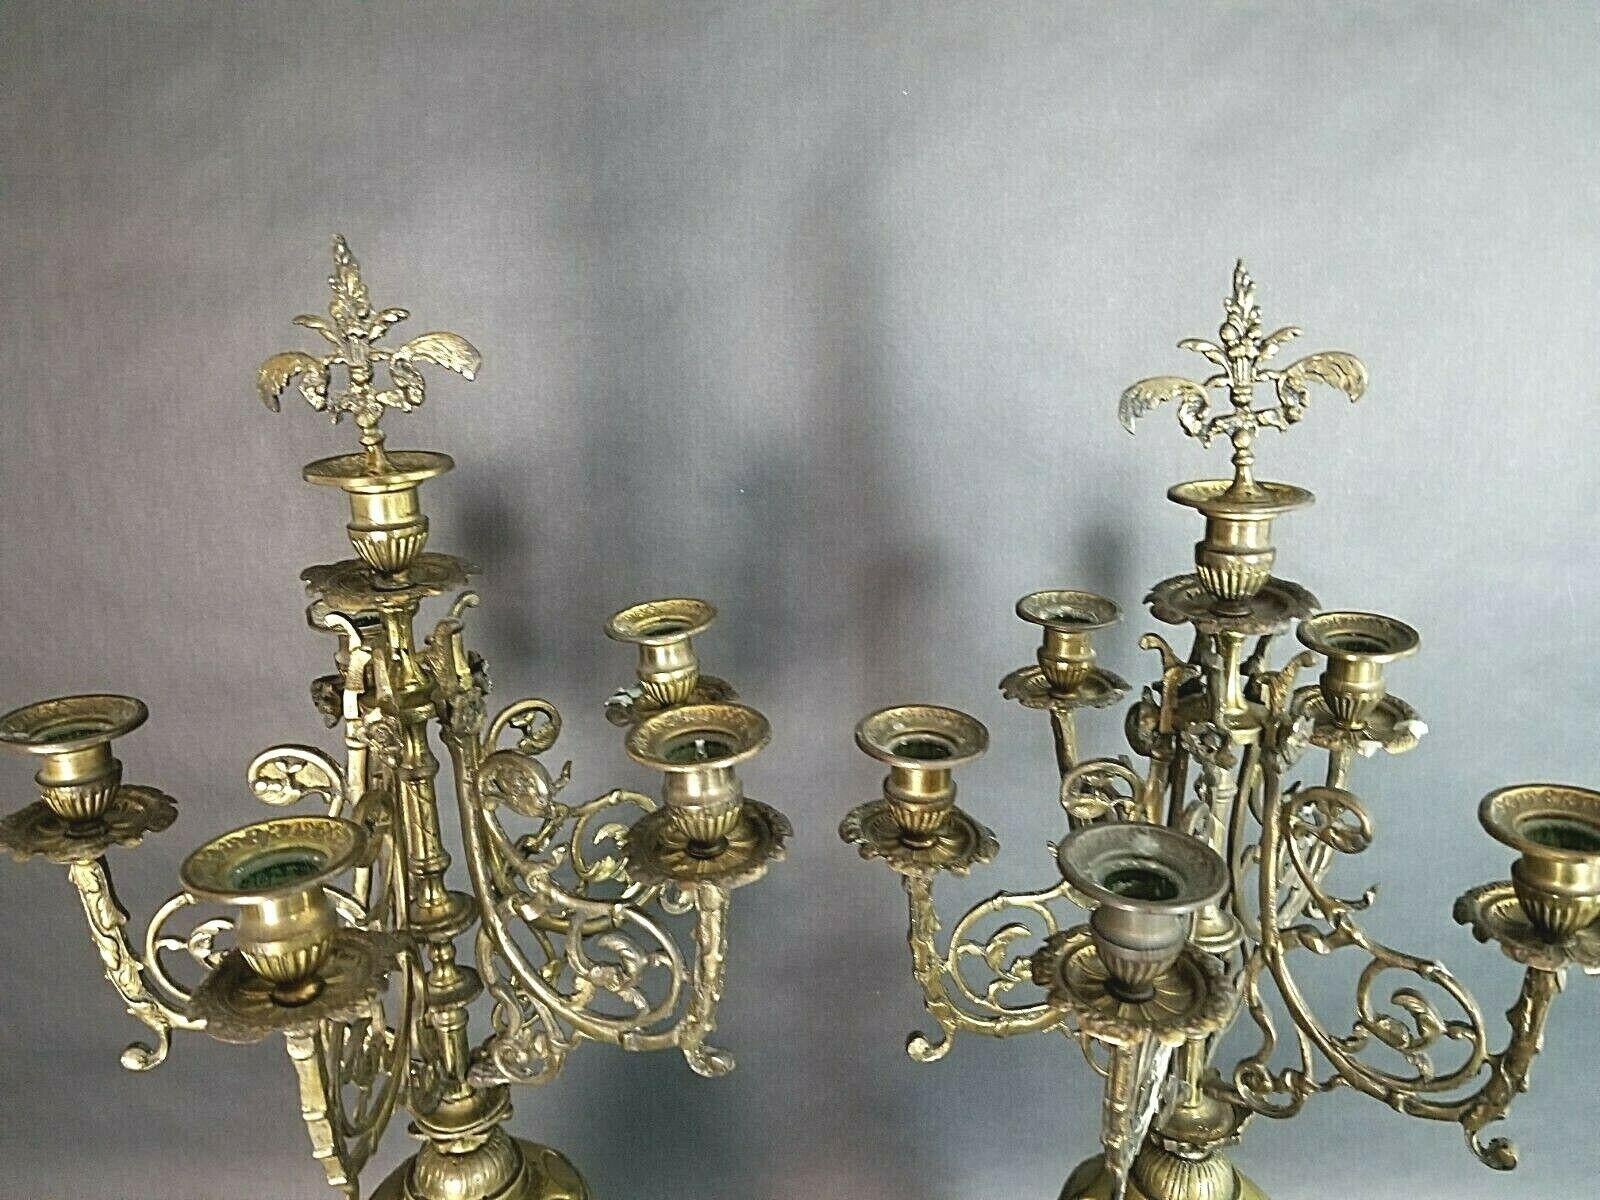 Brass Antique Italian Ornate Bronze French Louis XV Rococo 6 Point Candelabras For Sale